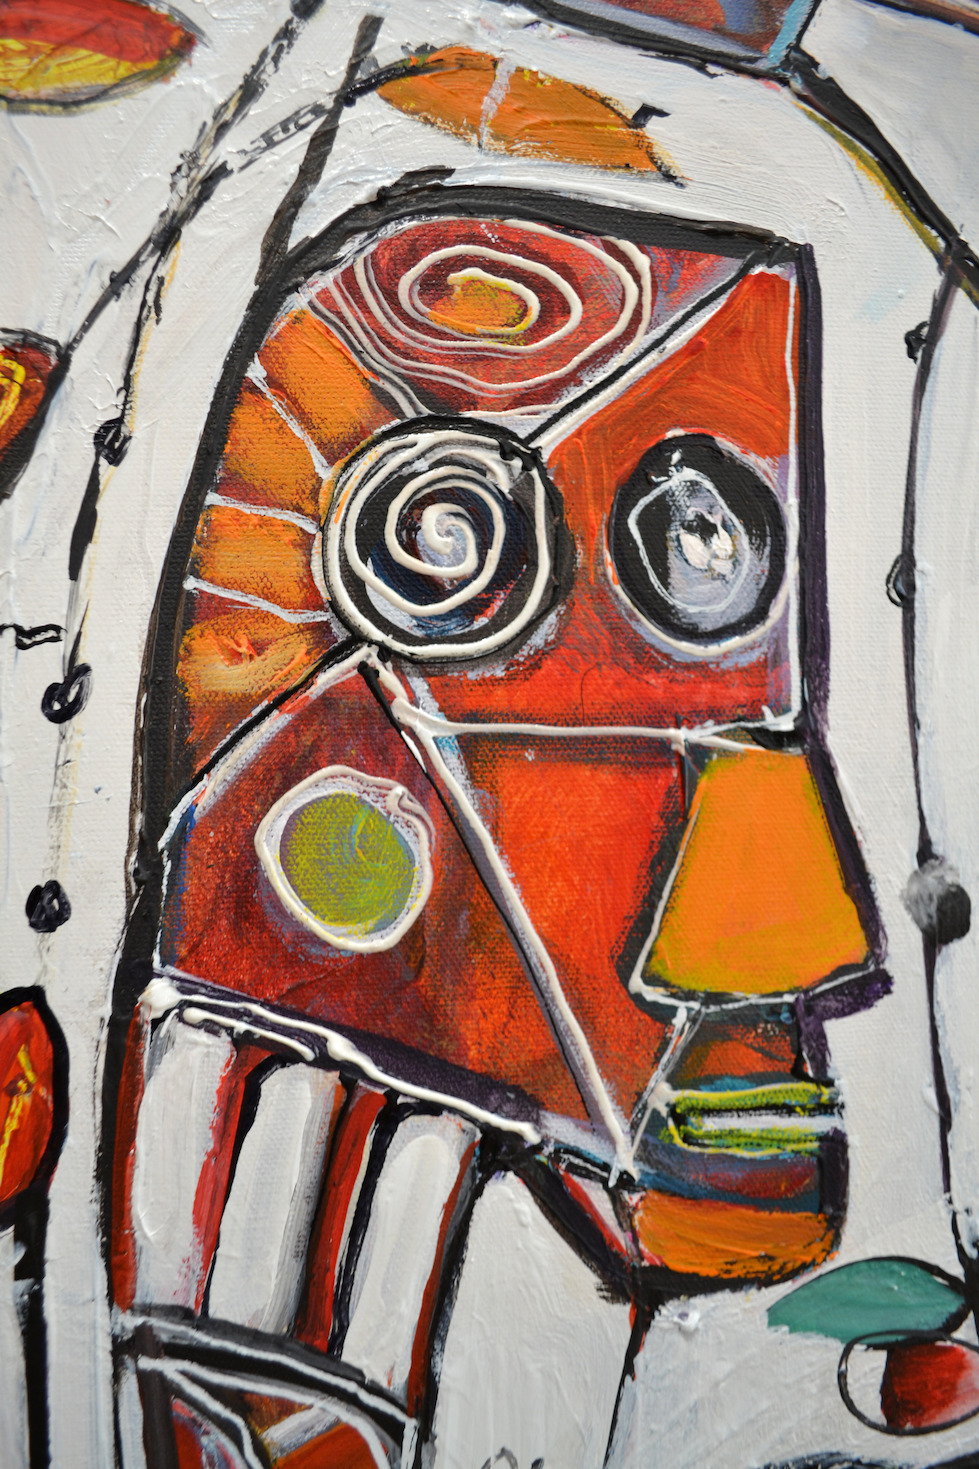 Close Up Detail 1 Of Acrylic Painting "Ainsi Va La Vie Tribal Mask" By Lucette Dalozzo